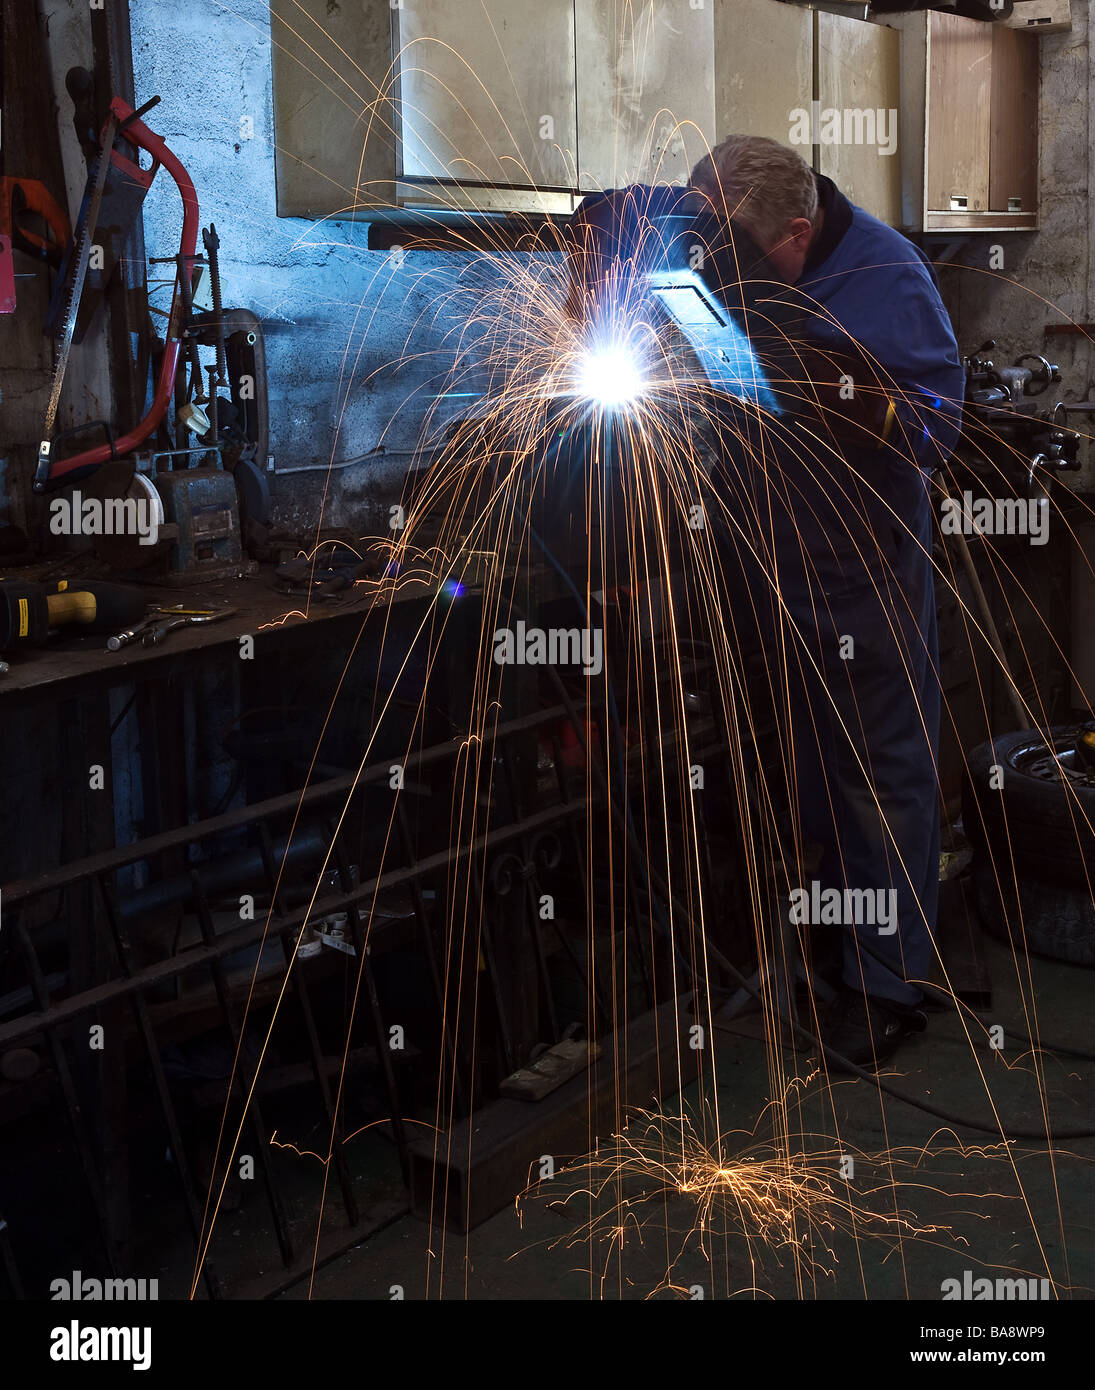 Sparks from arc welding. Stock Photo